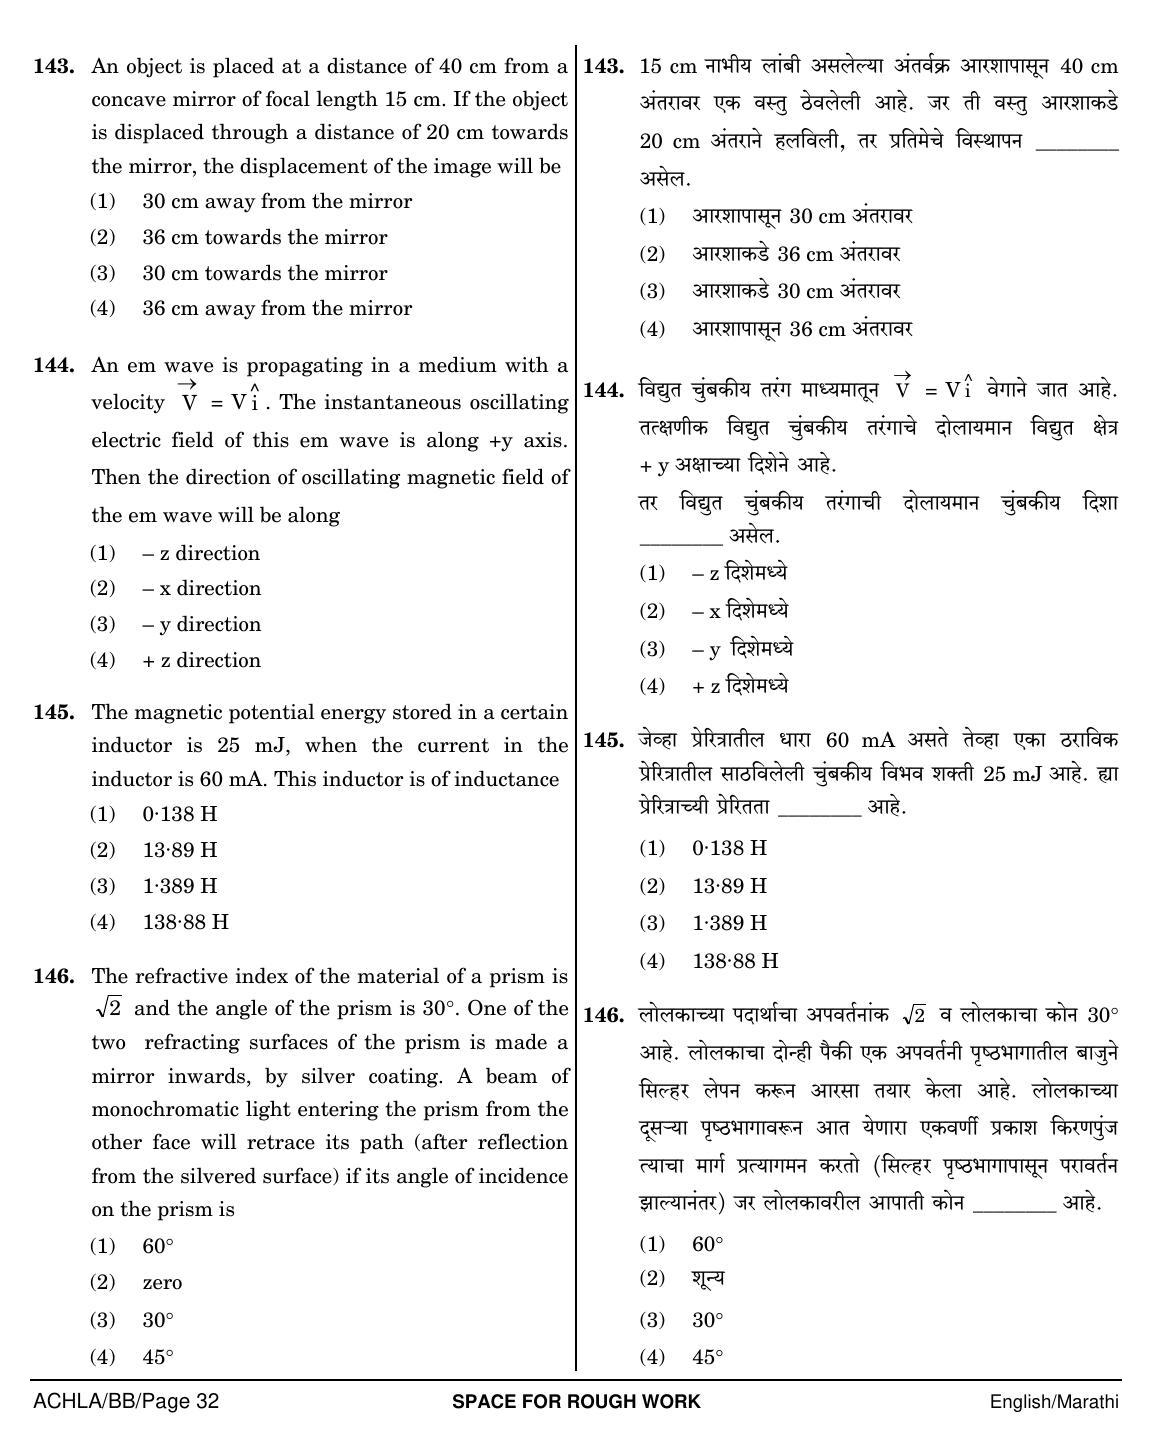 NEET Marathi BB 2018 Question Paper - Page 32